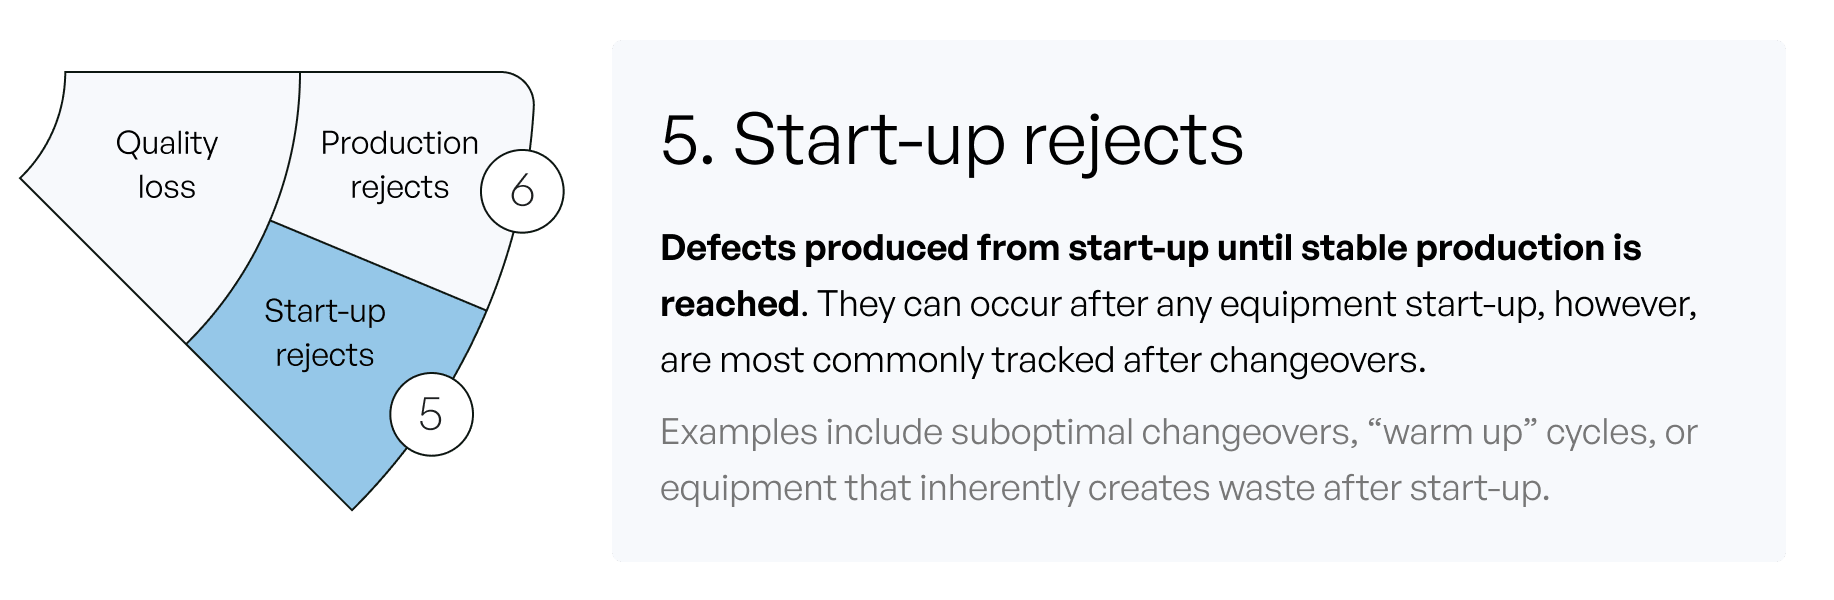 start-up rejects are defects produced until stable production is reached